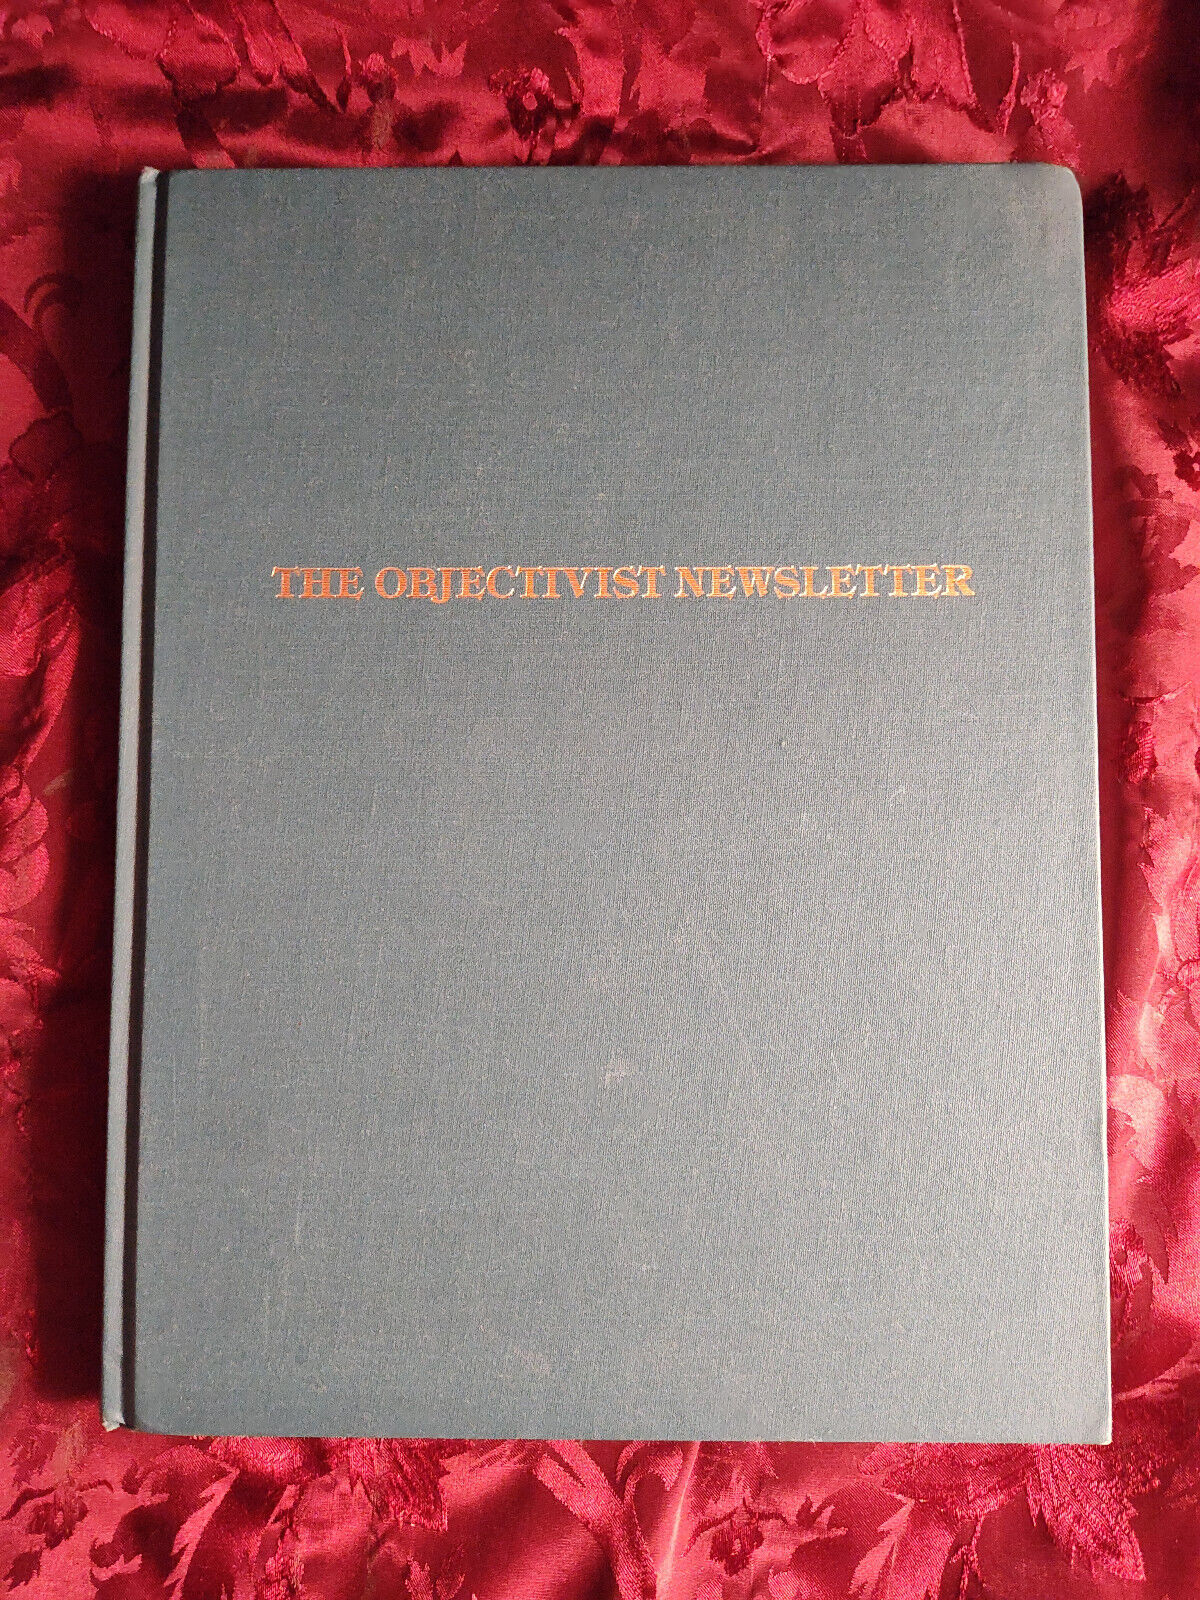 RARE Ayn Rand The Objectivist Newsletter Bound Edition Early Printing